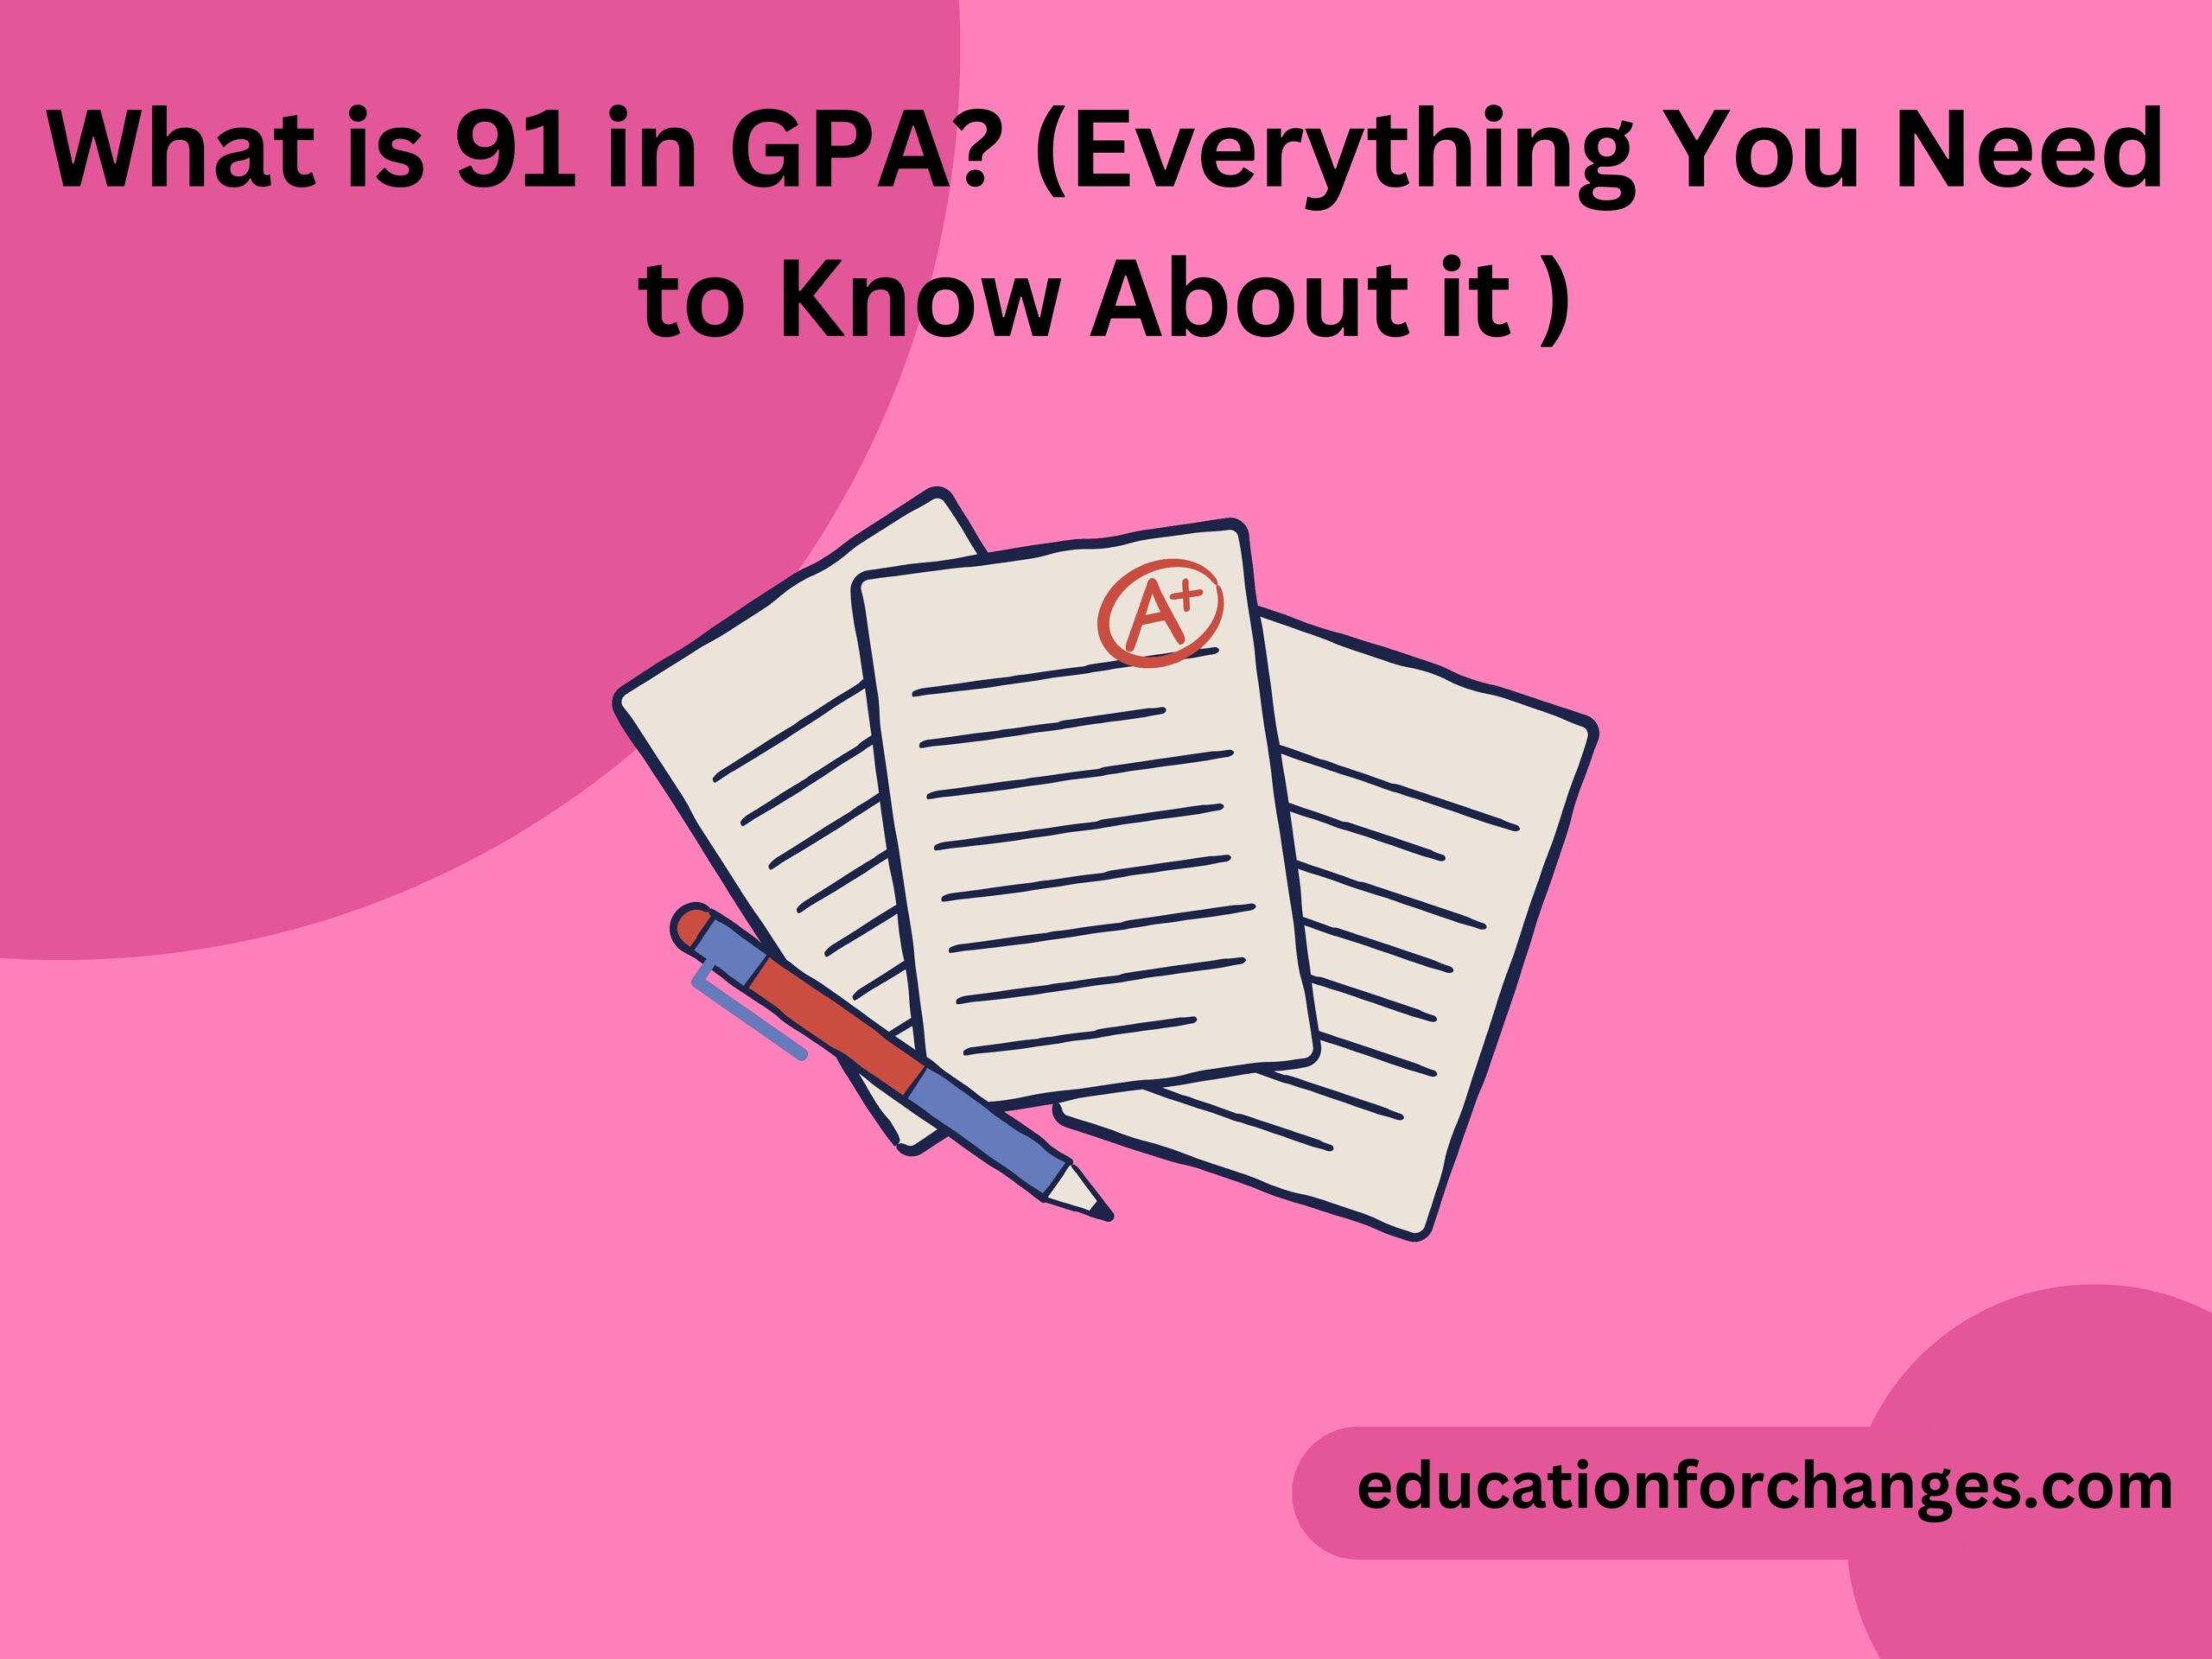 What is 91 in GPA? (Everything You Need to Know About it